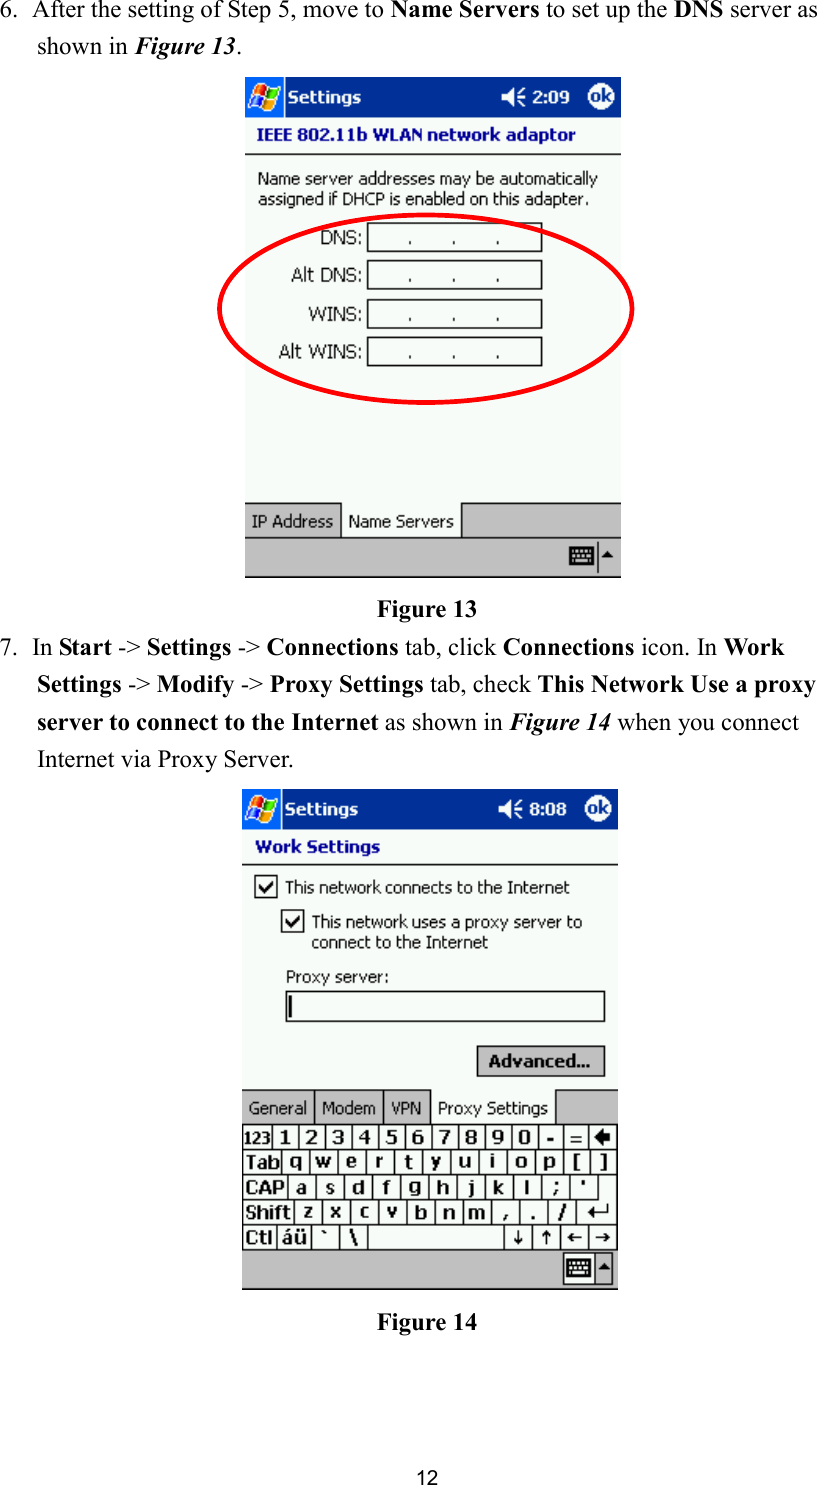  126. After the setting of Step 5, move to Name Servers to set up the DNS server as shown in Figure 13.    Figure 13 7. In Start -&gt; Settings -&gt; Connections tab, click Connections icon. In Work Settings -&gt; Modify -&gt; Proxy Settings tab, check This Network Use a proxy server to connect to the Internet as shown in Figure 14 when you connect Internet via Proxy Server.  Figure 14  